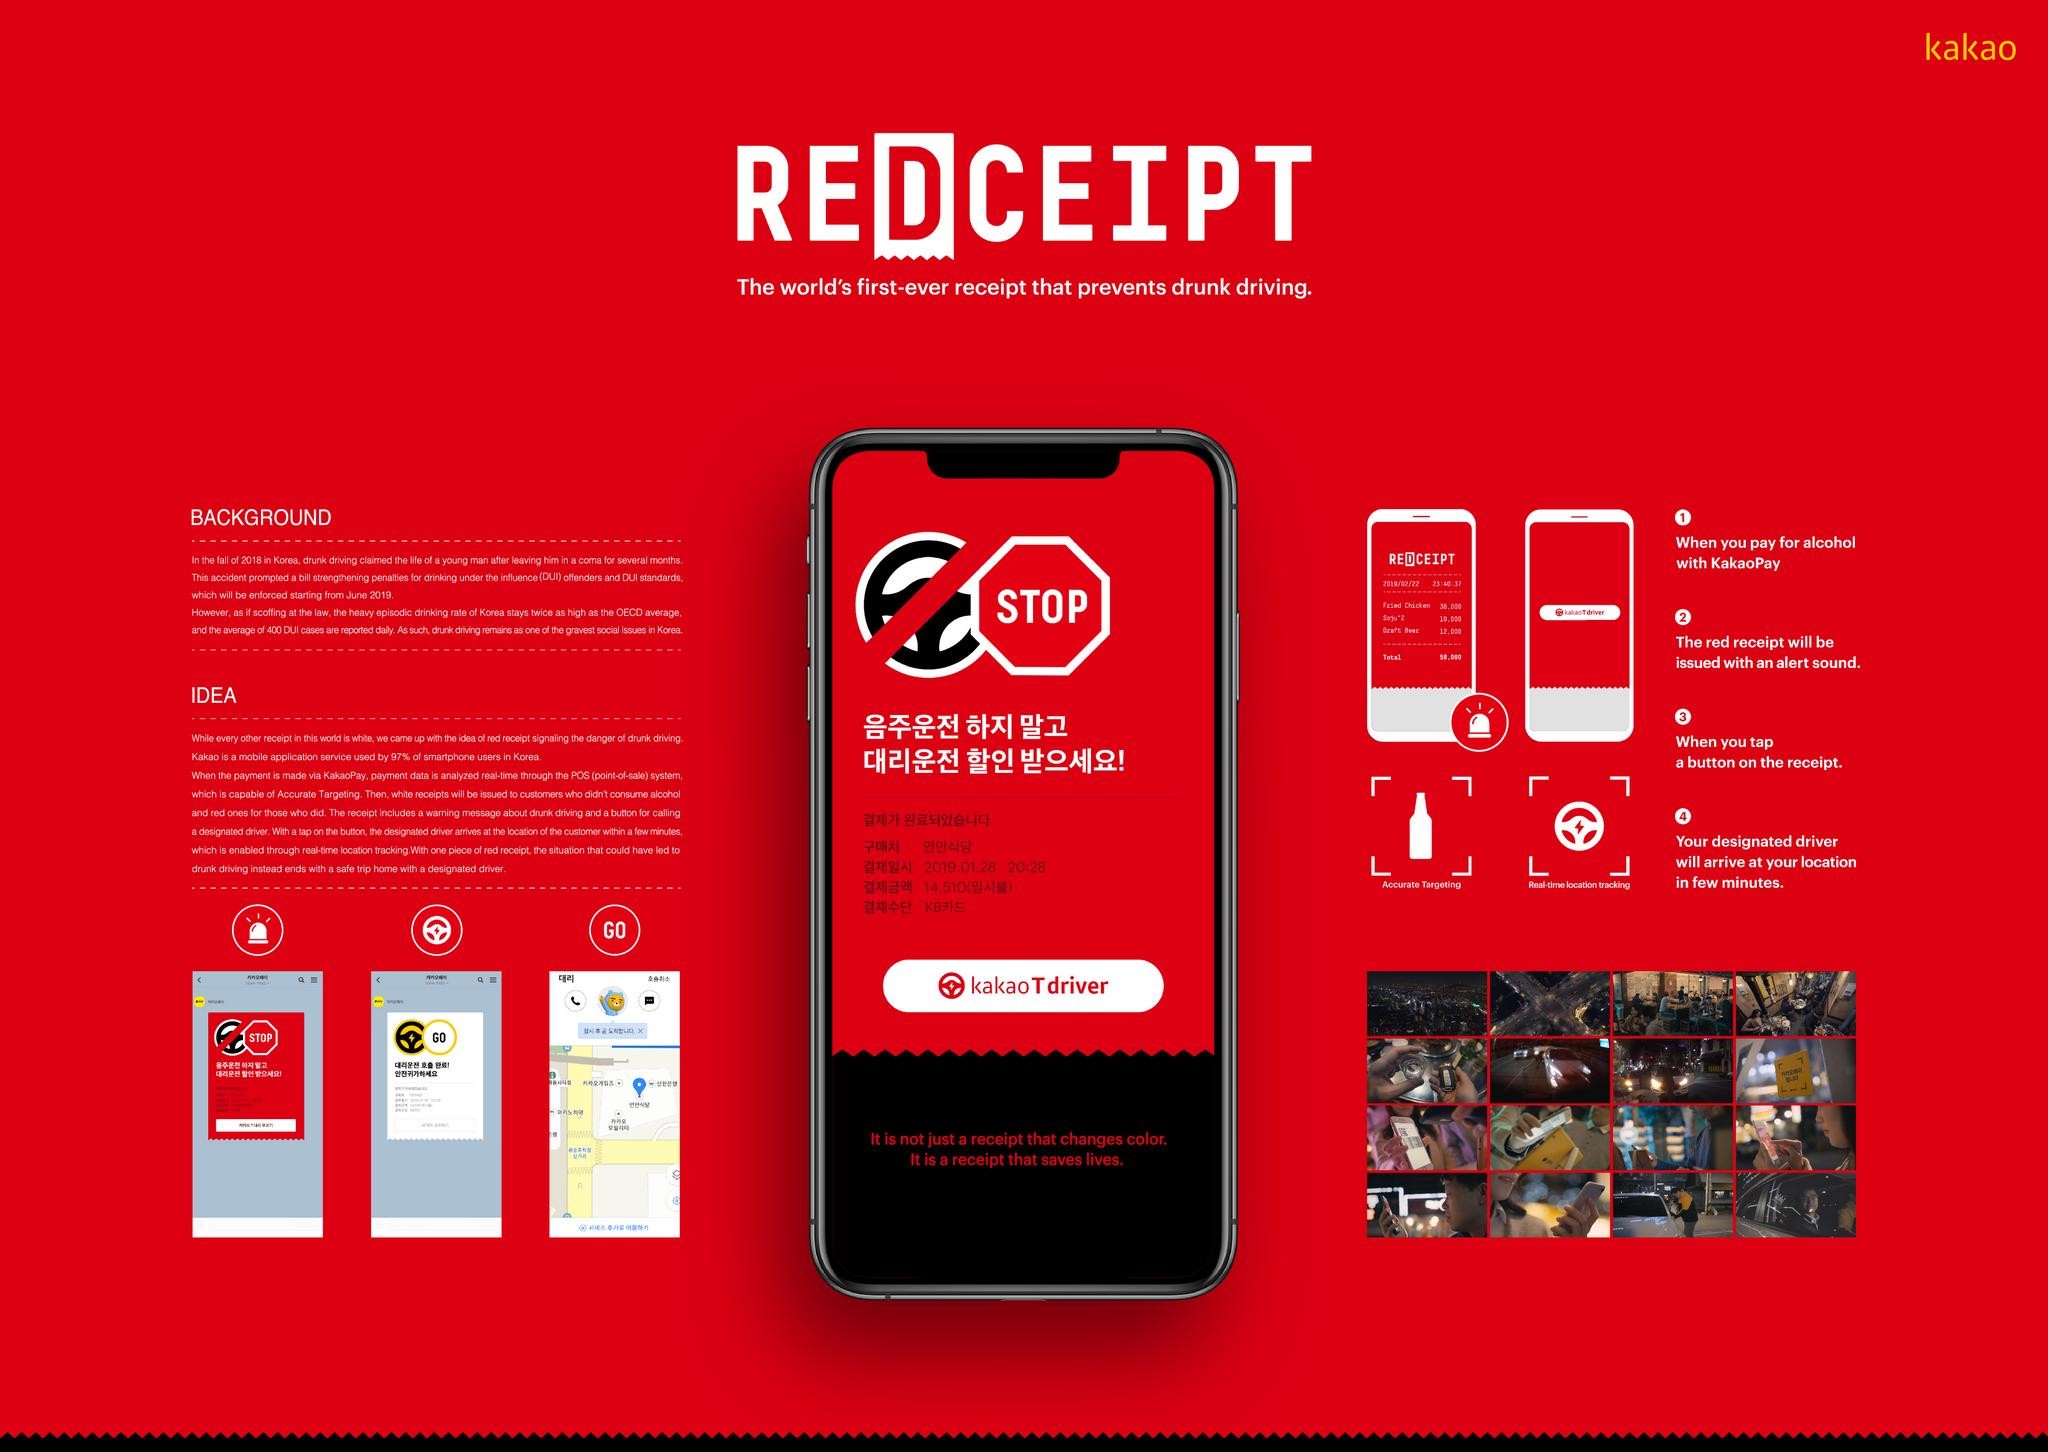 REDCEIPT